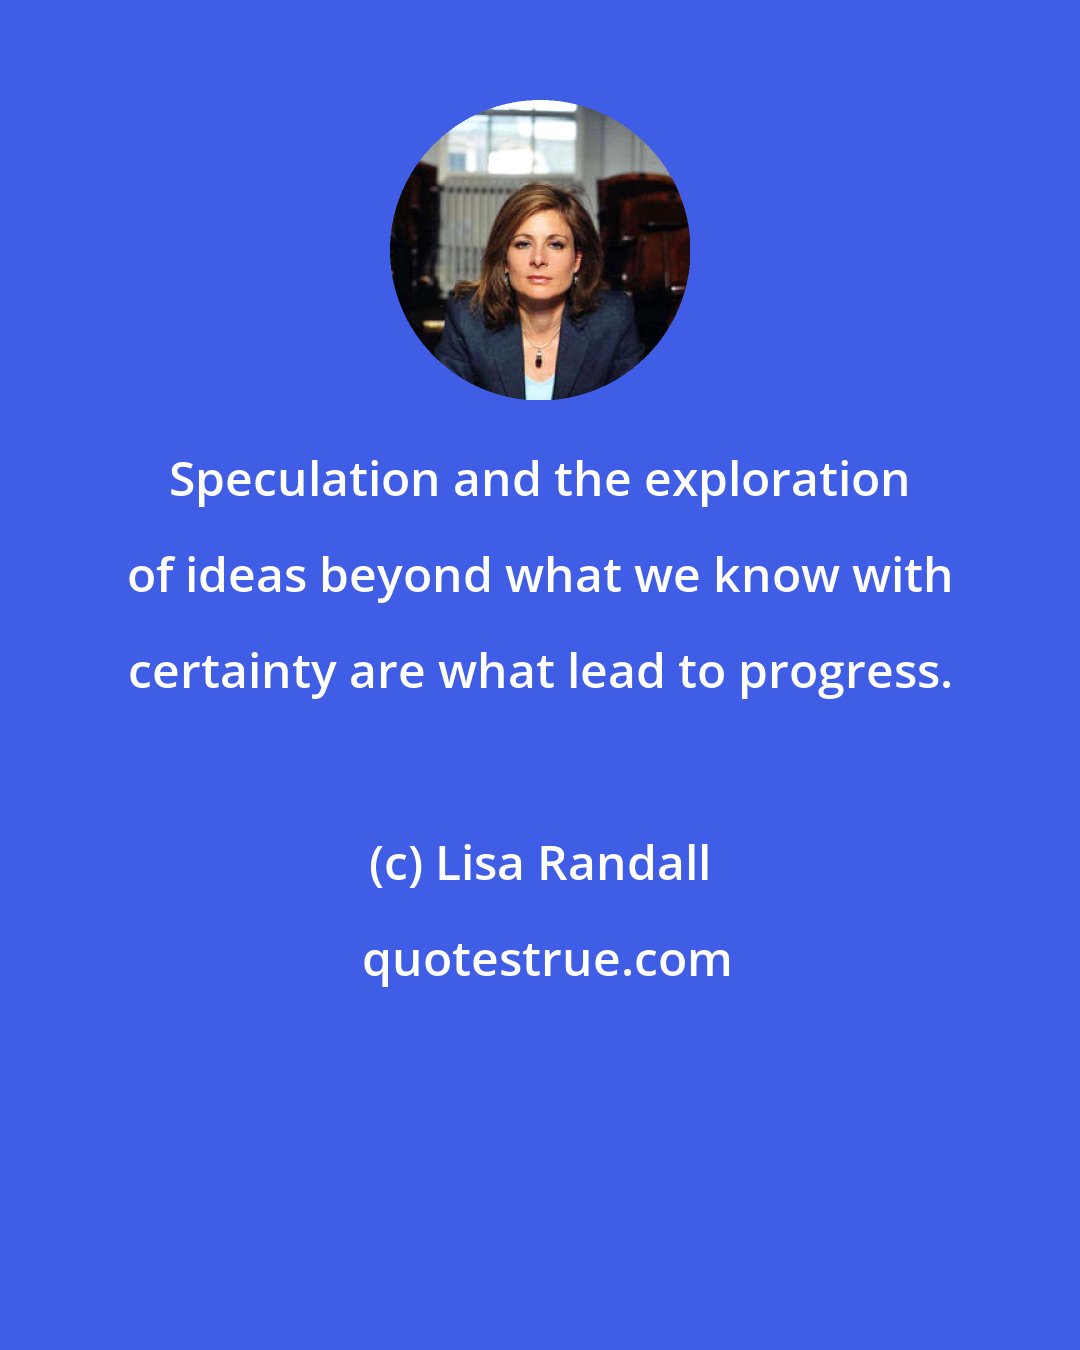 Lisa Randall: Speculation and the exploration of ideas beyond what we know with certainty are what lead to progress.